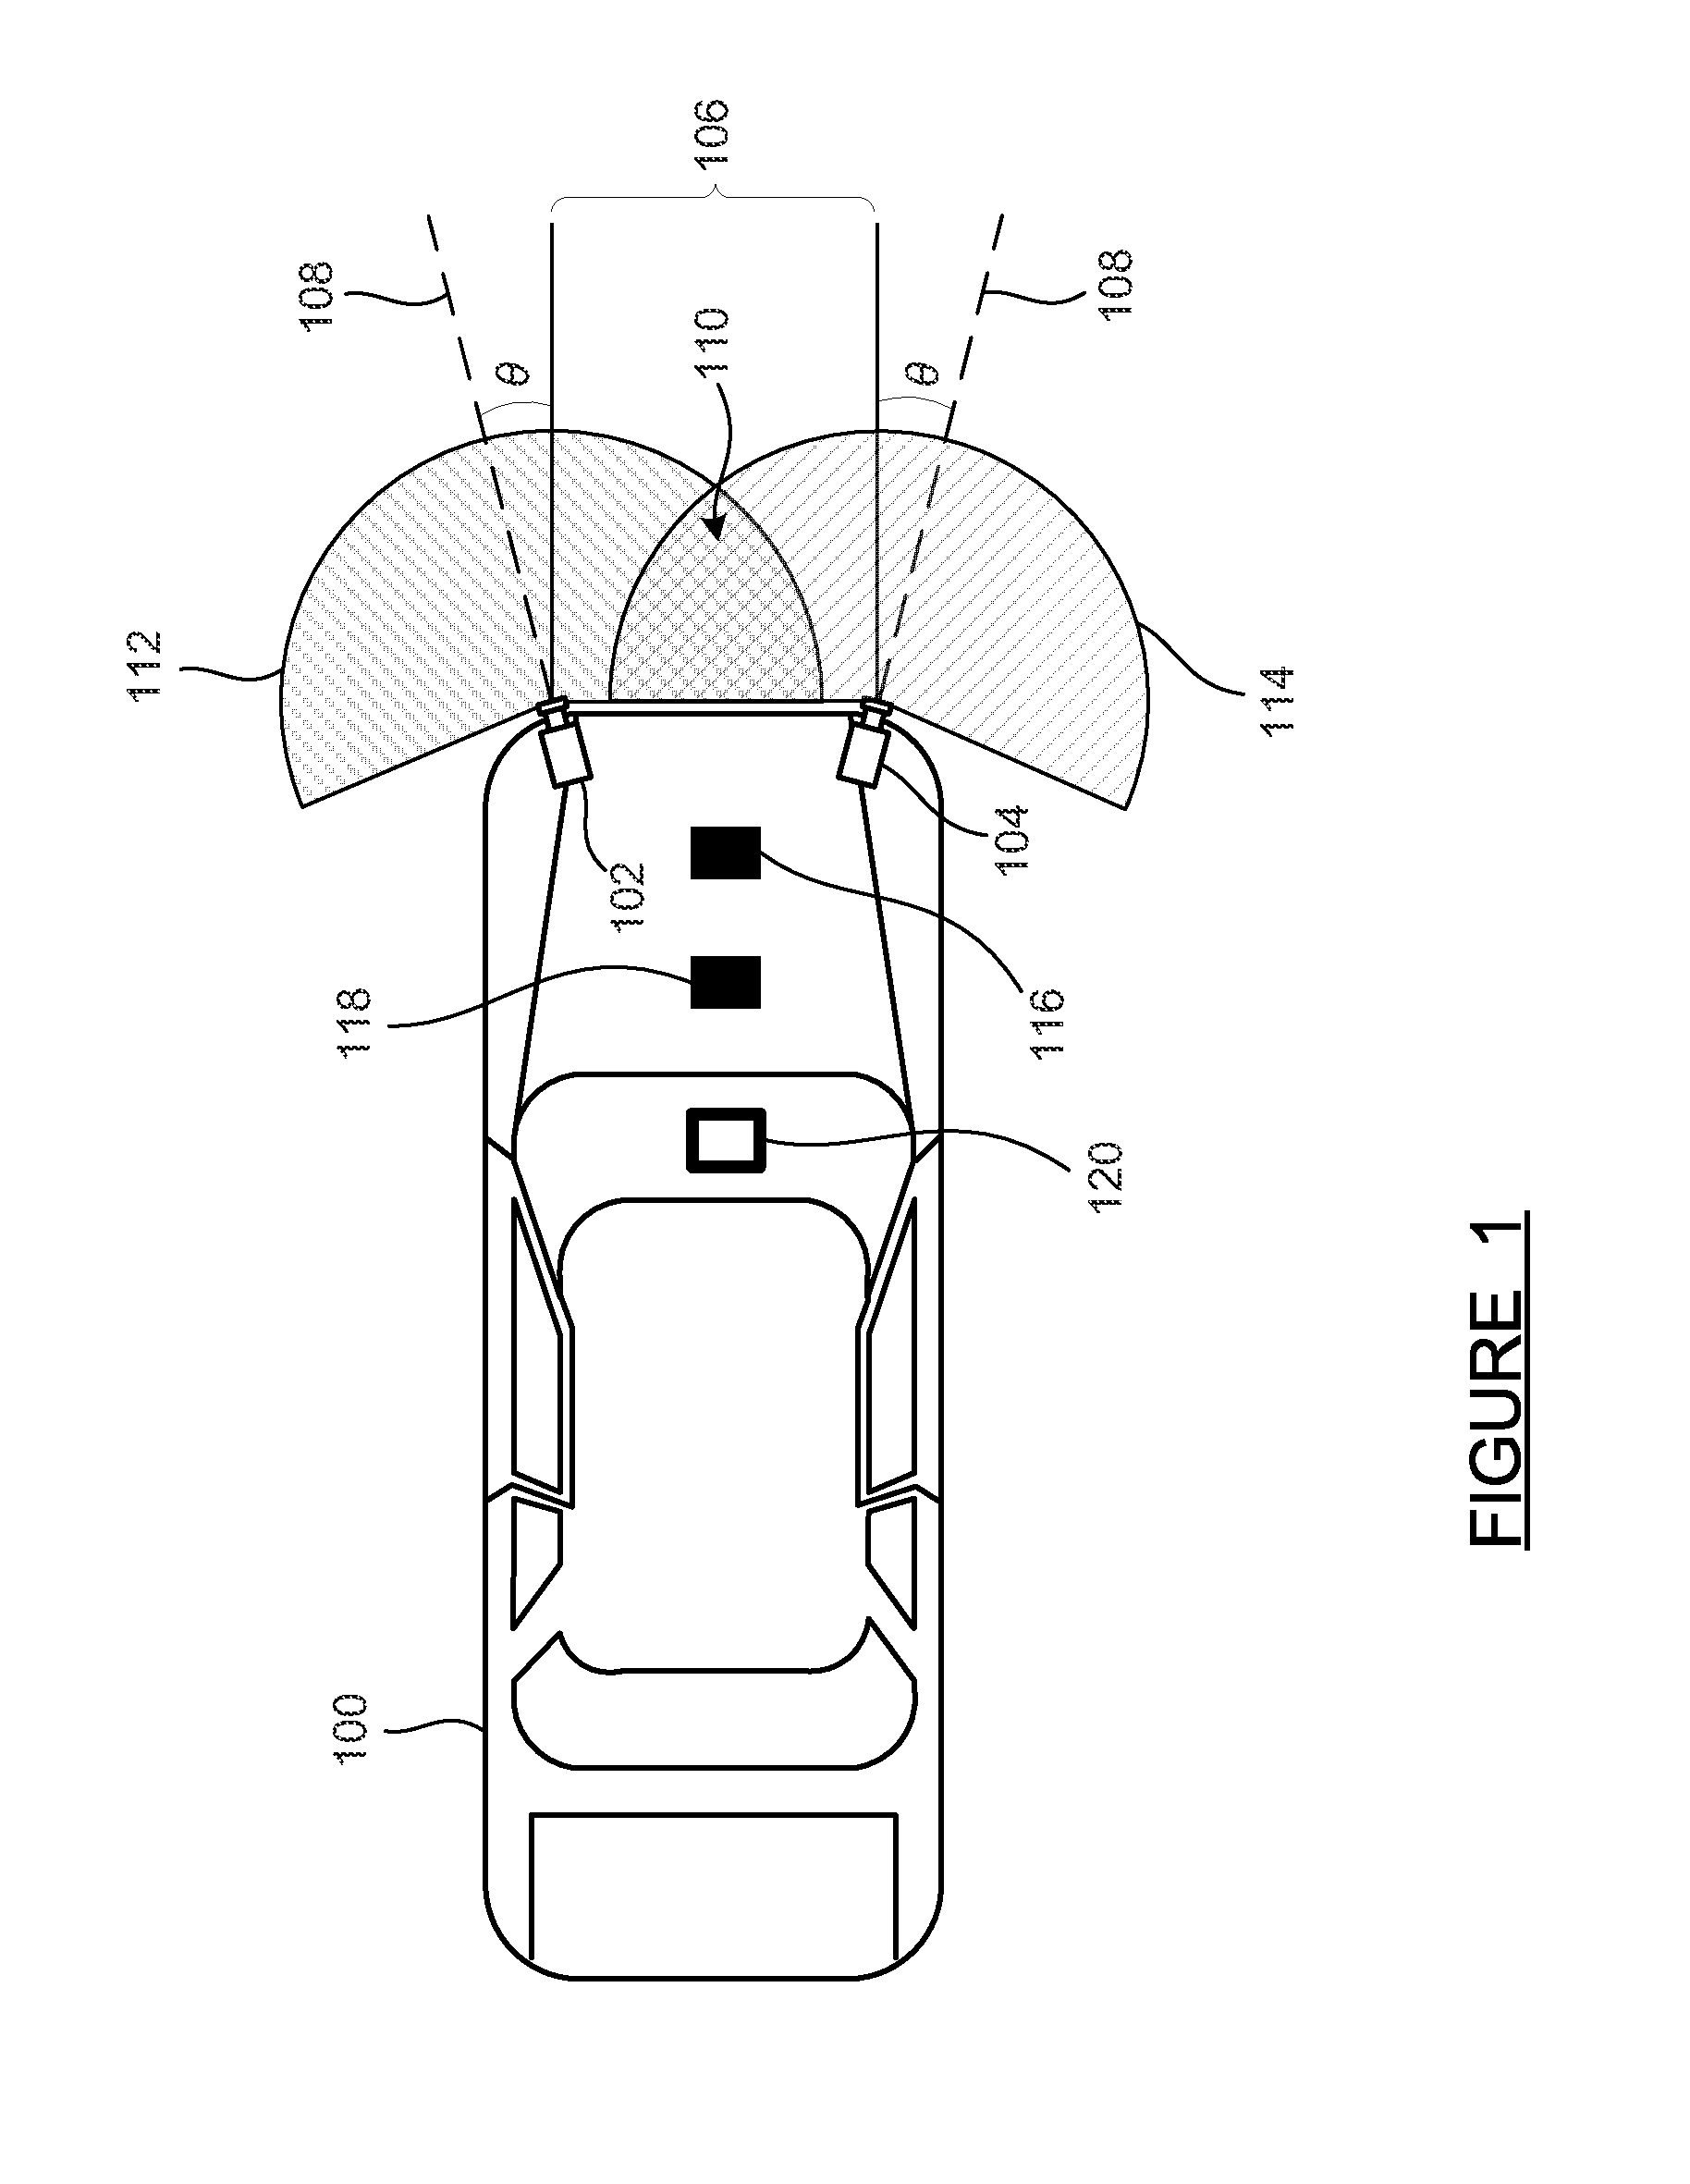 Enhanced top-down view generation in a front curb viewing system